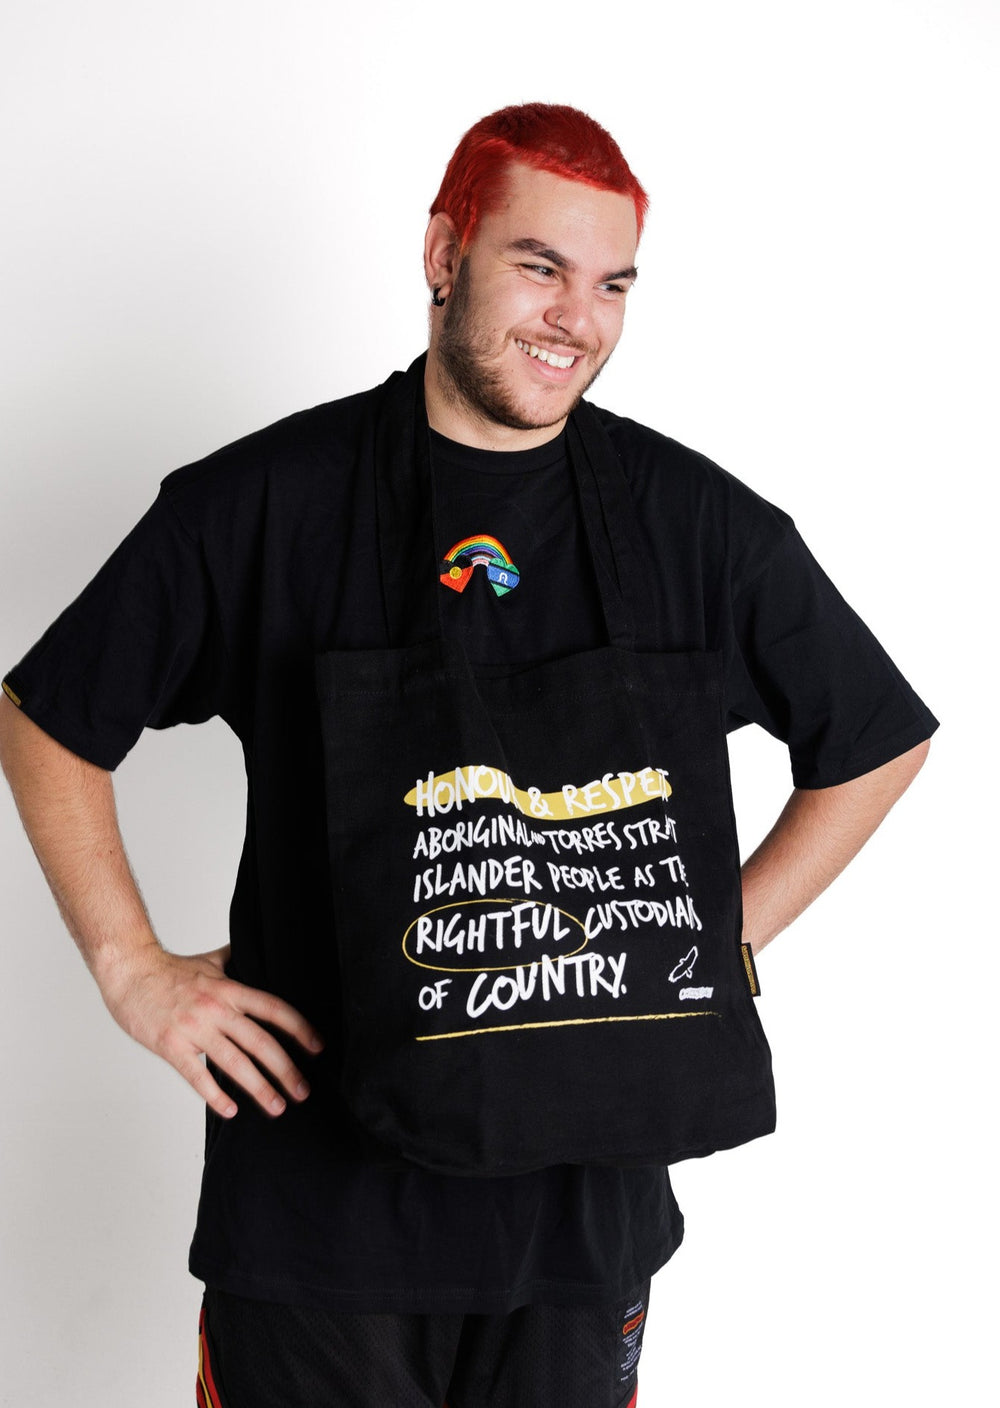 Clothing The Gaps. Honour Country Tote Bag. Black tote bag with 2 over the shoulder black straps. With white hand-writen style text 'Honour and respect Aboriginal and Torres Strait Islander people as the rightful custodians of country.' Circling 'rightful' underlining 'country' and highlighting 'honour and respect' in a sand yellow colour. Outlined 'bunjil' eagle in right corner.